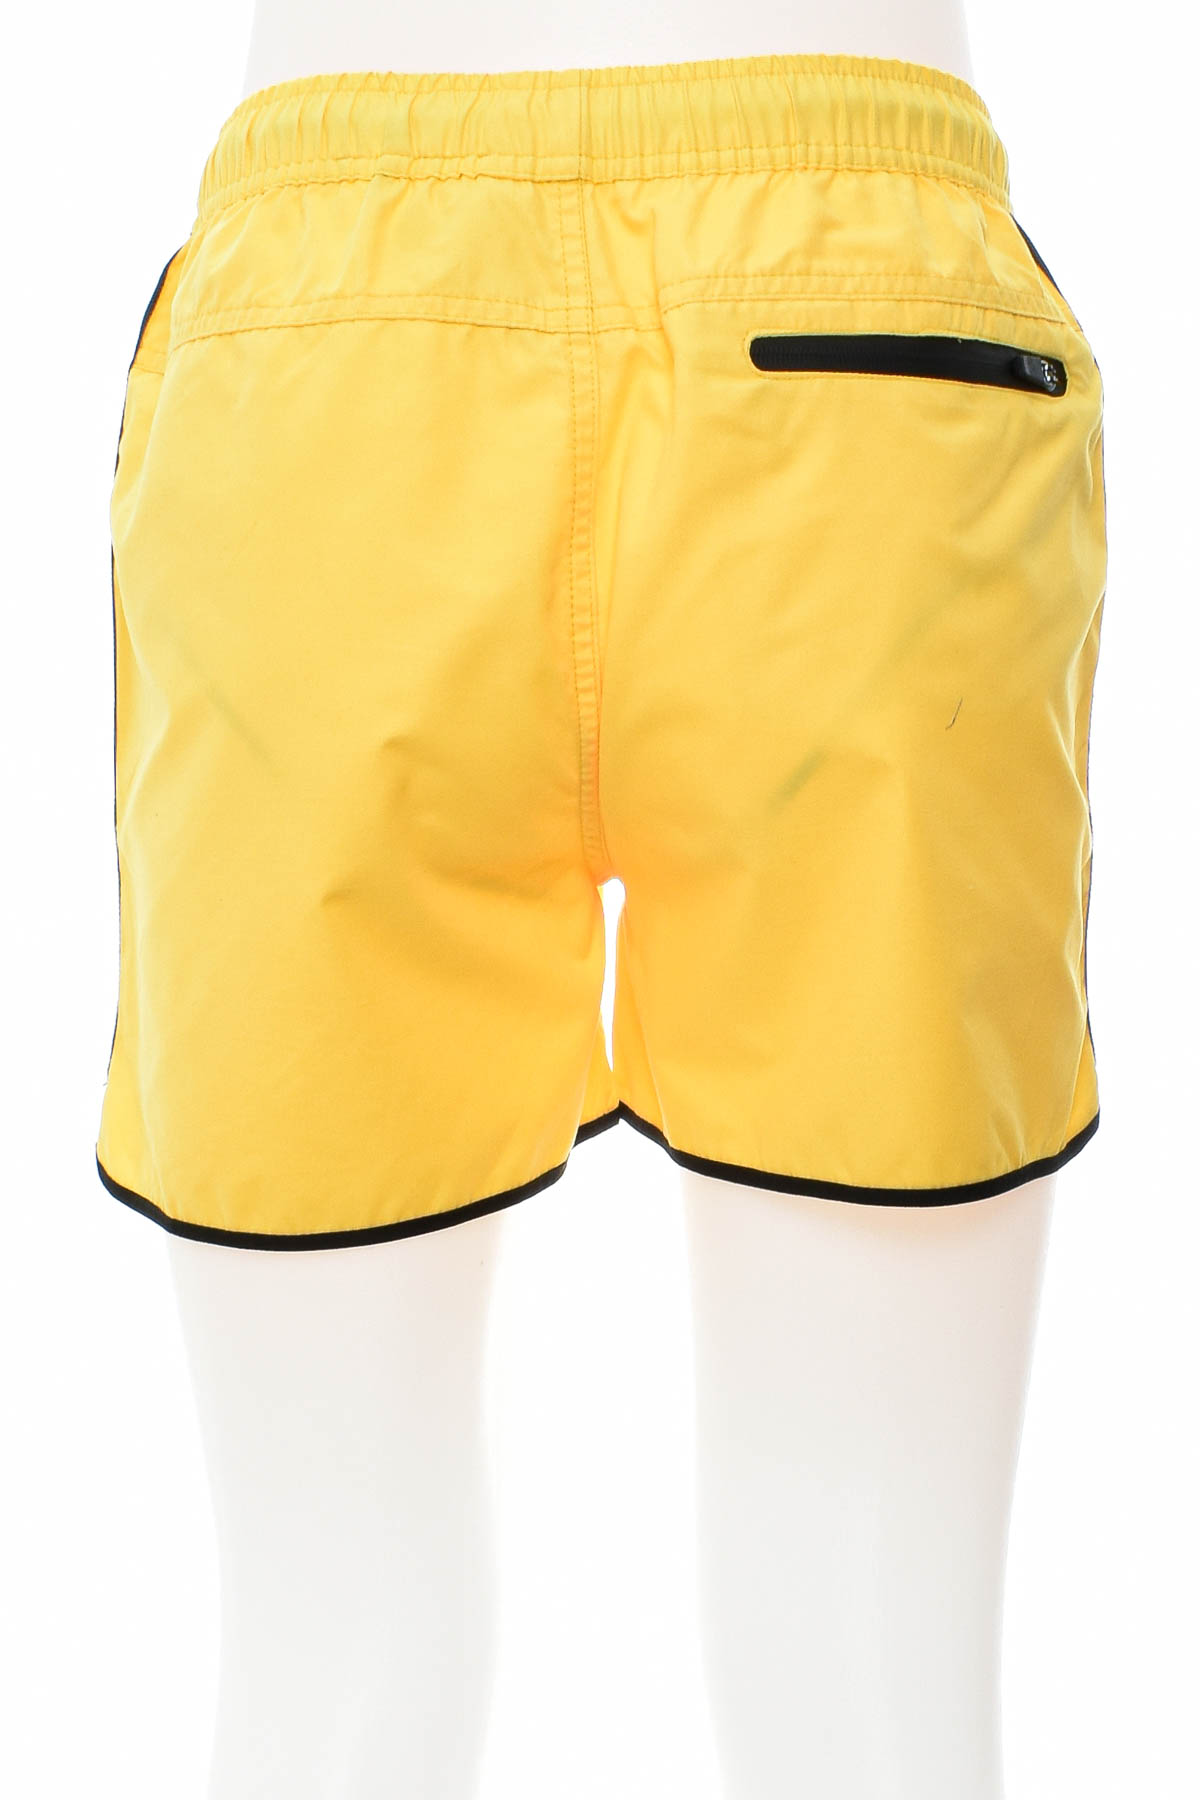 Men's shorts - Ashes to dust - 1